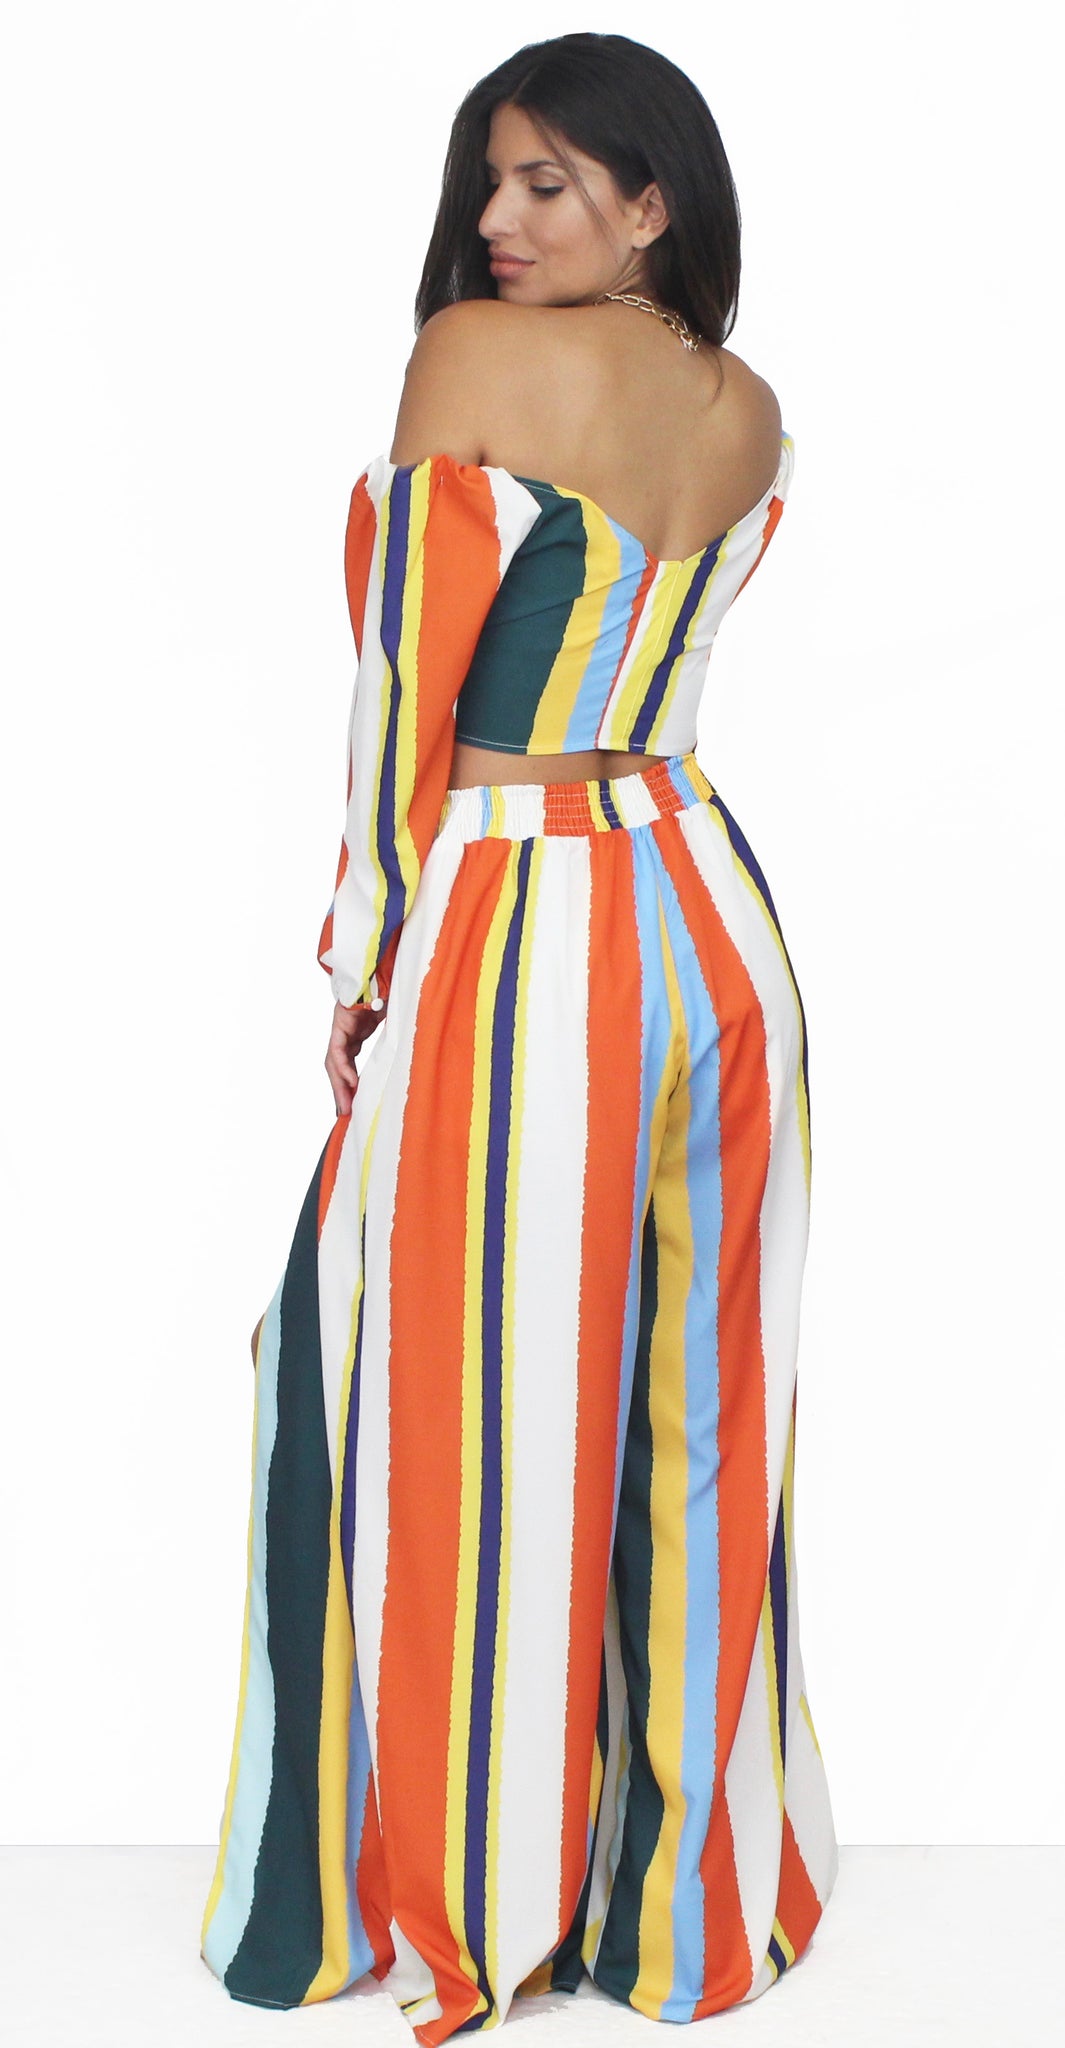 Bring the Colorful Stripes Two-Piece Set